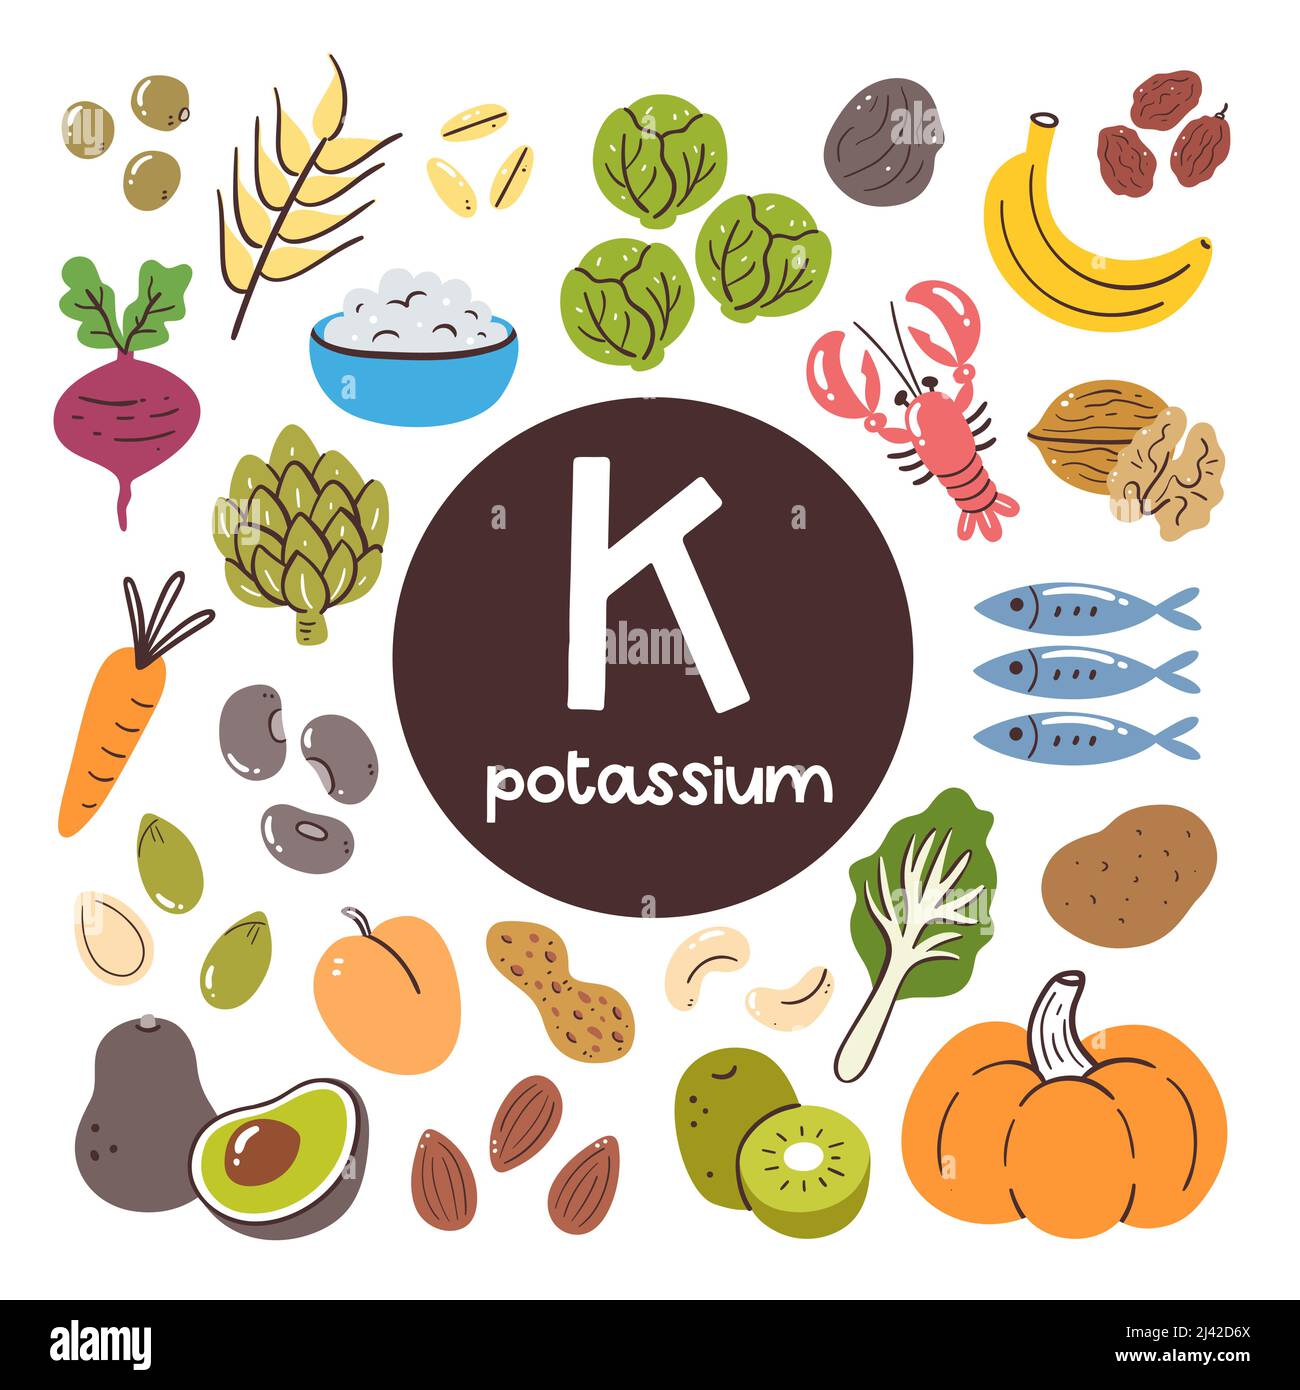 Food products with high level of Potassium. Cooking ingredients. Fruits, vegetables, legumes, nuts, dairy, seafood. Stock Vector